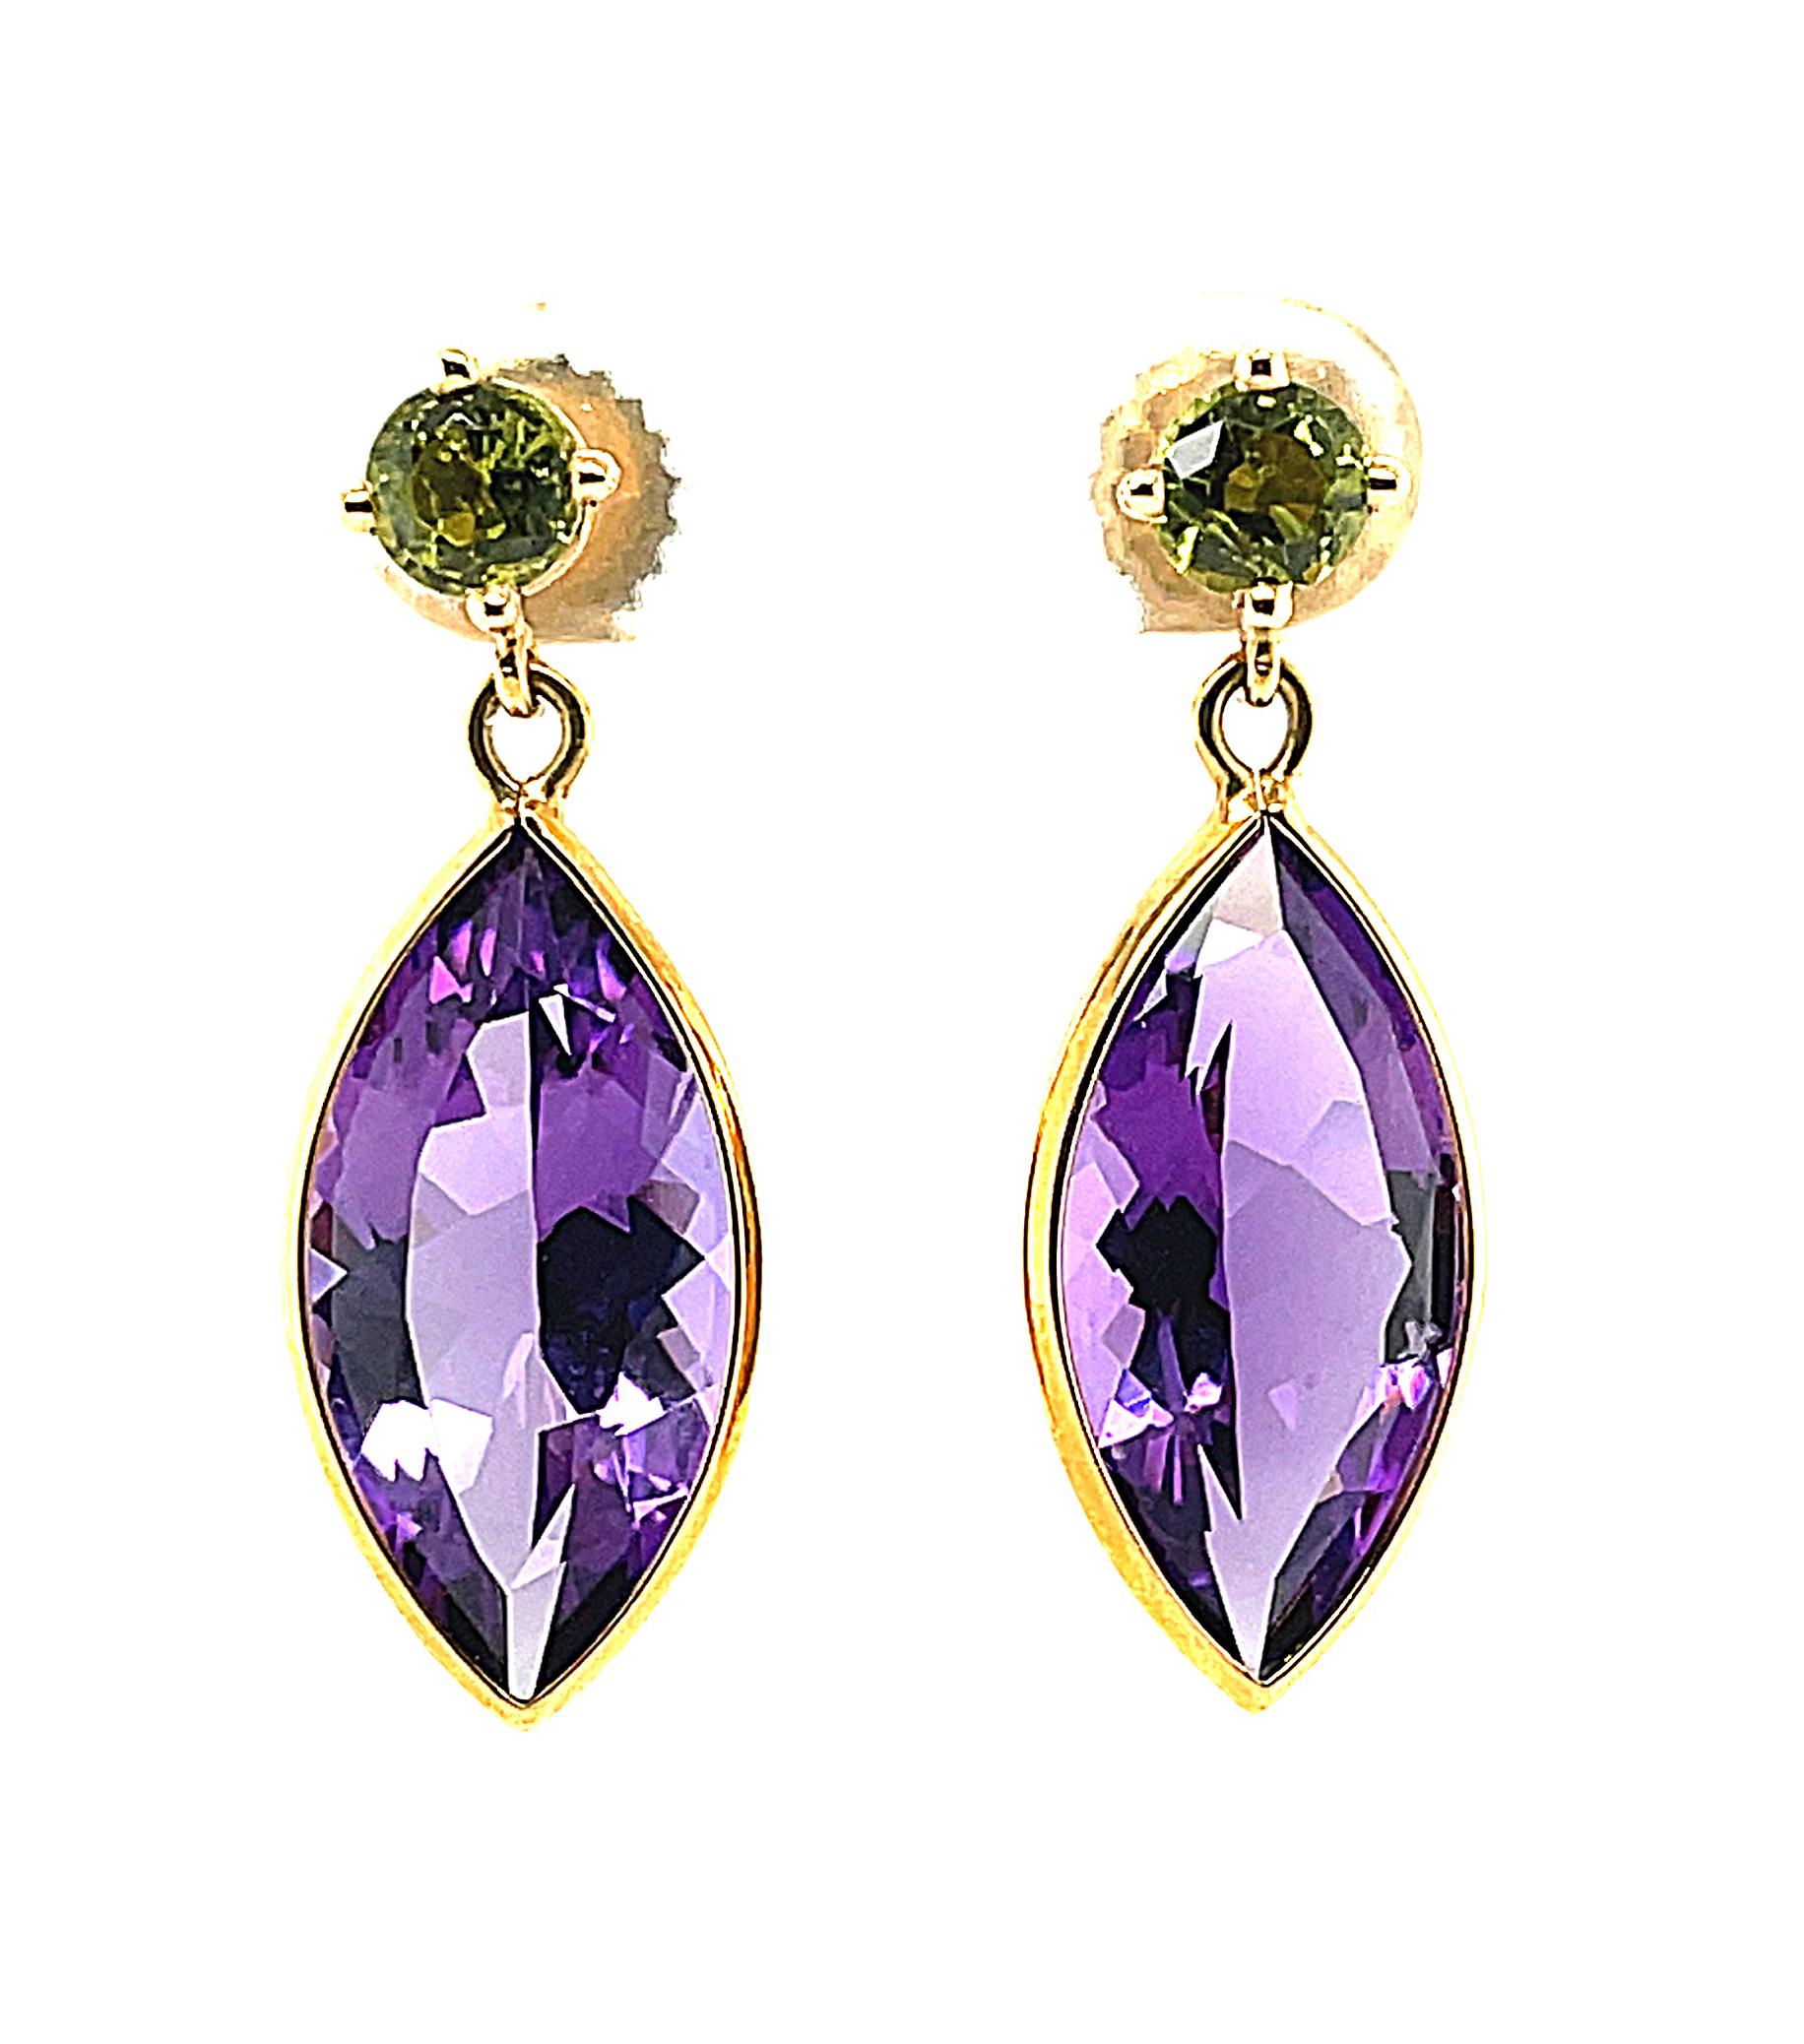 The unique combination of gemstone colors and shapes make these earrings so special. Two round, bright 